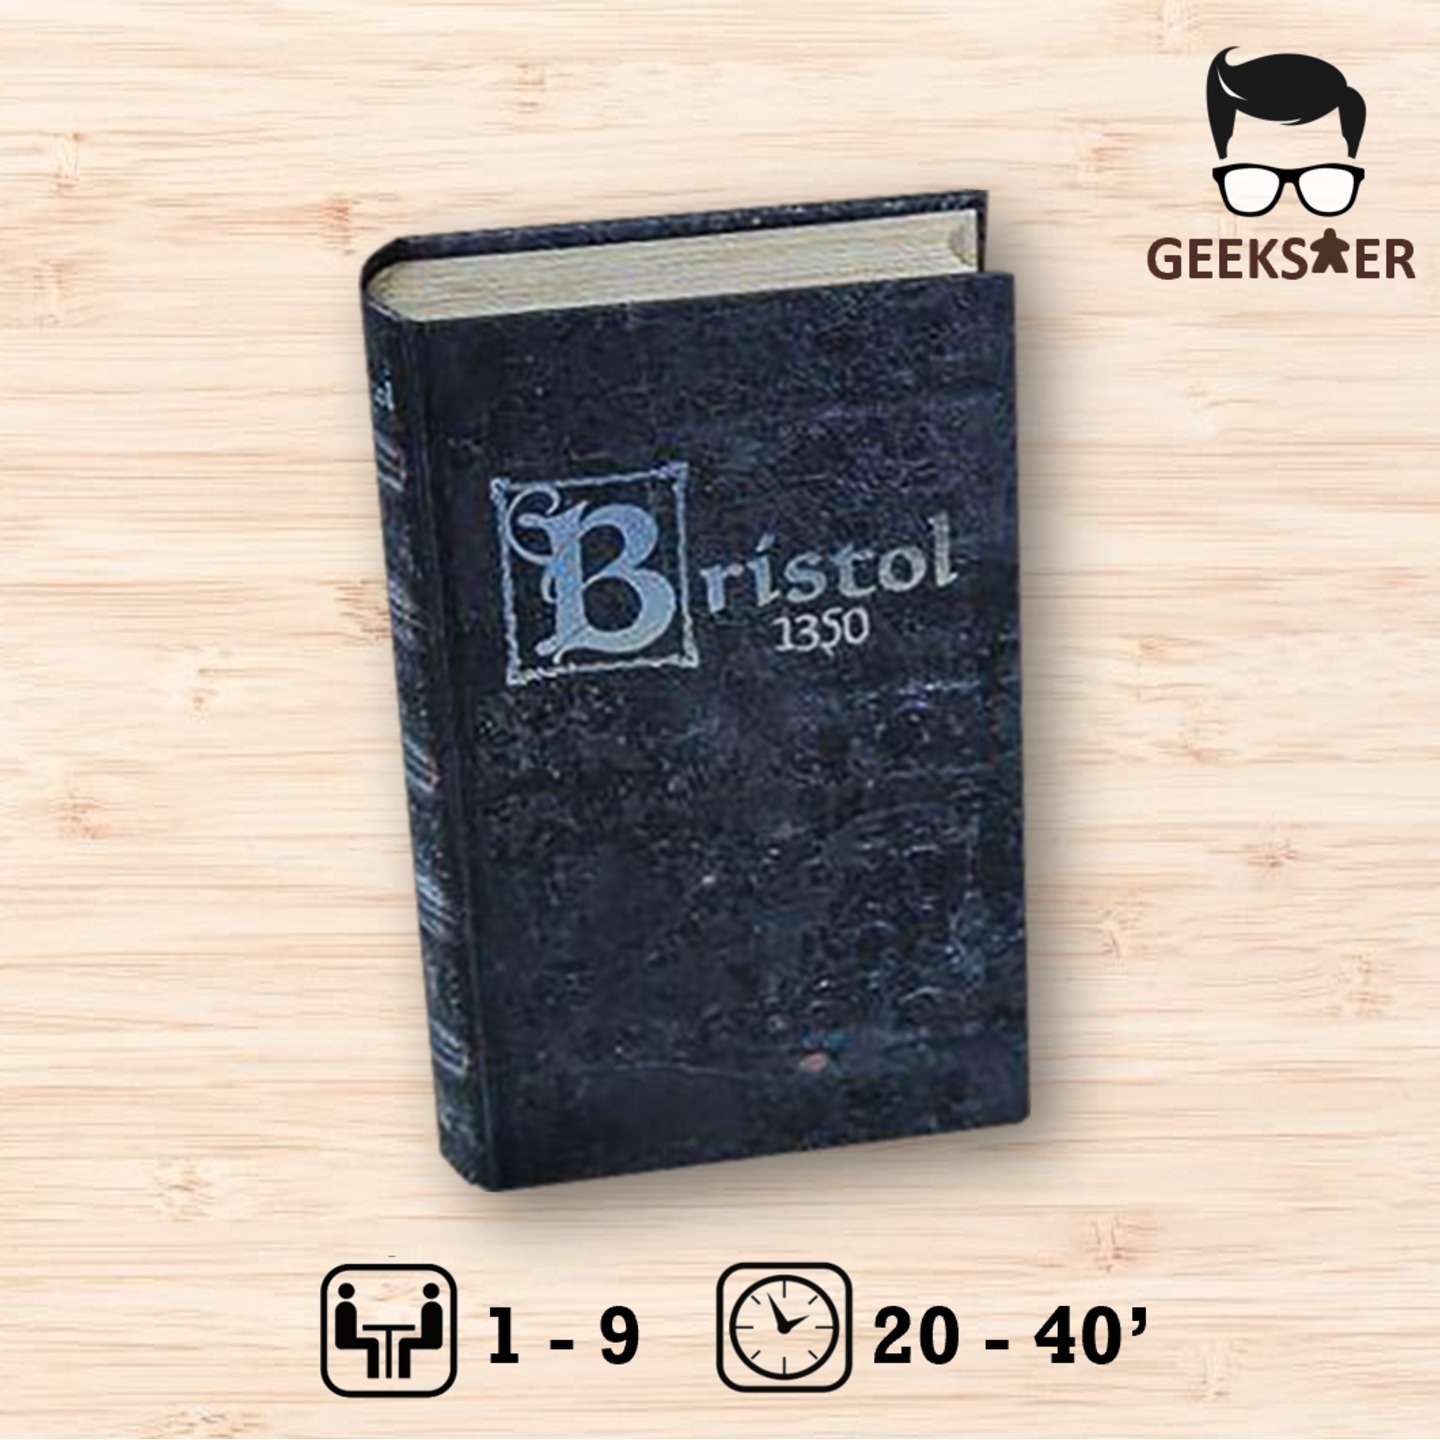 Bristol 1350 [Standard Edition + 9 KS Exclusive Character Cards]